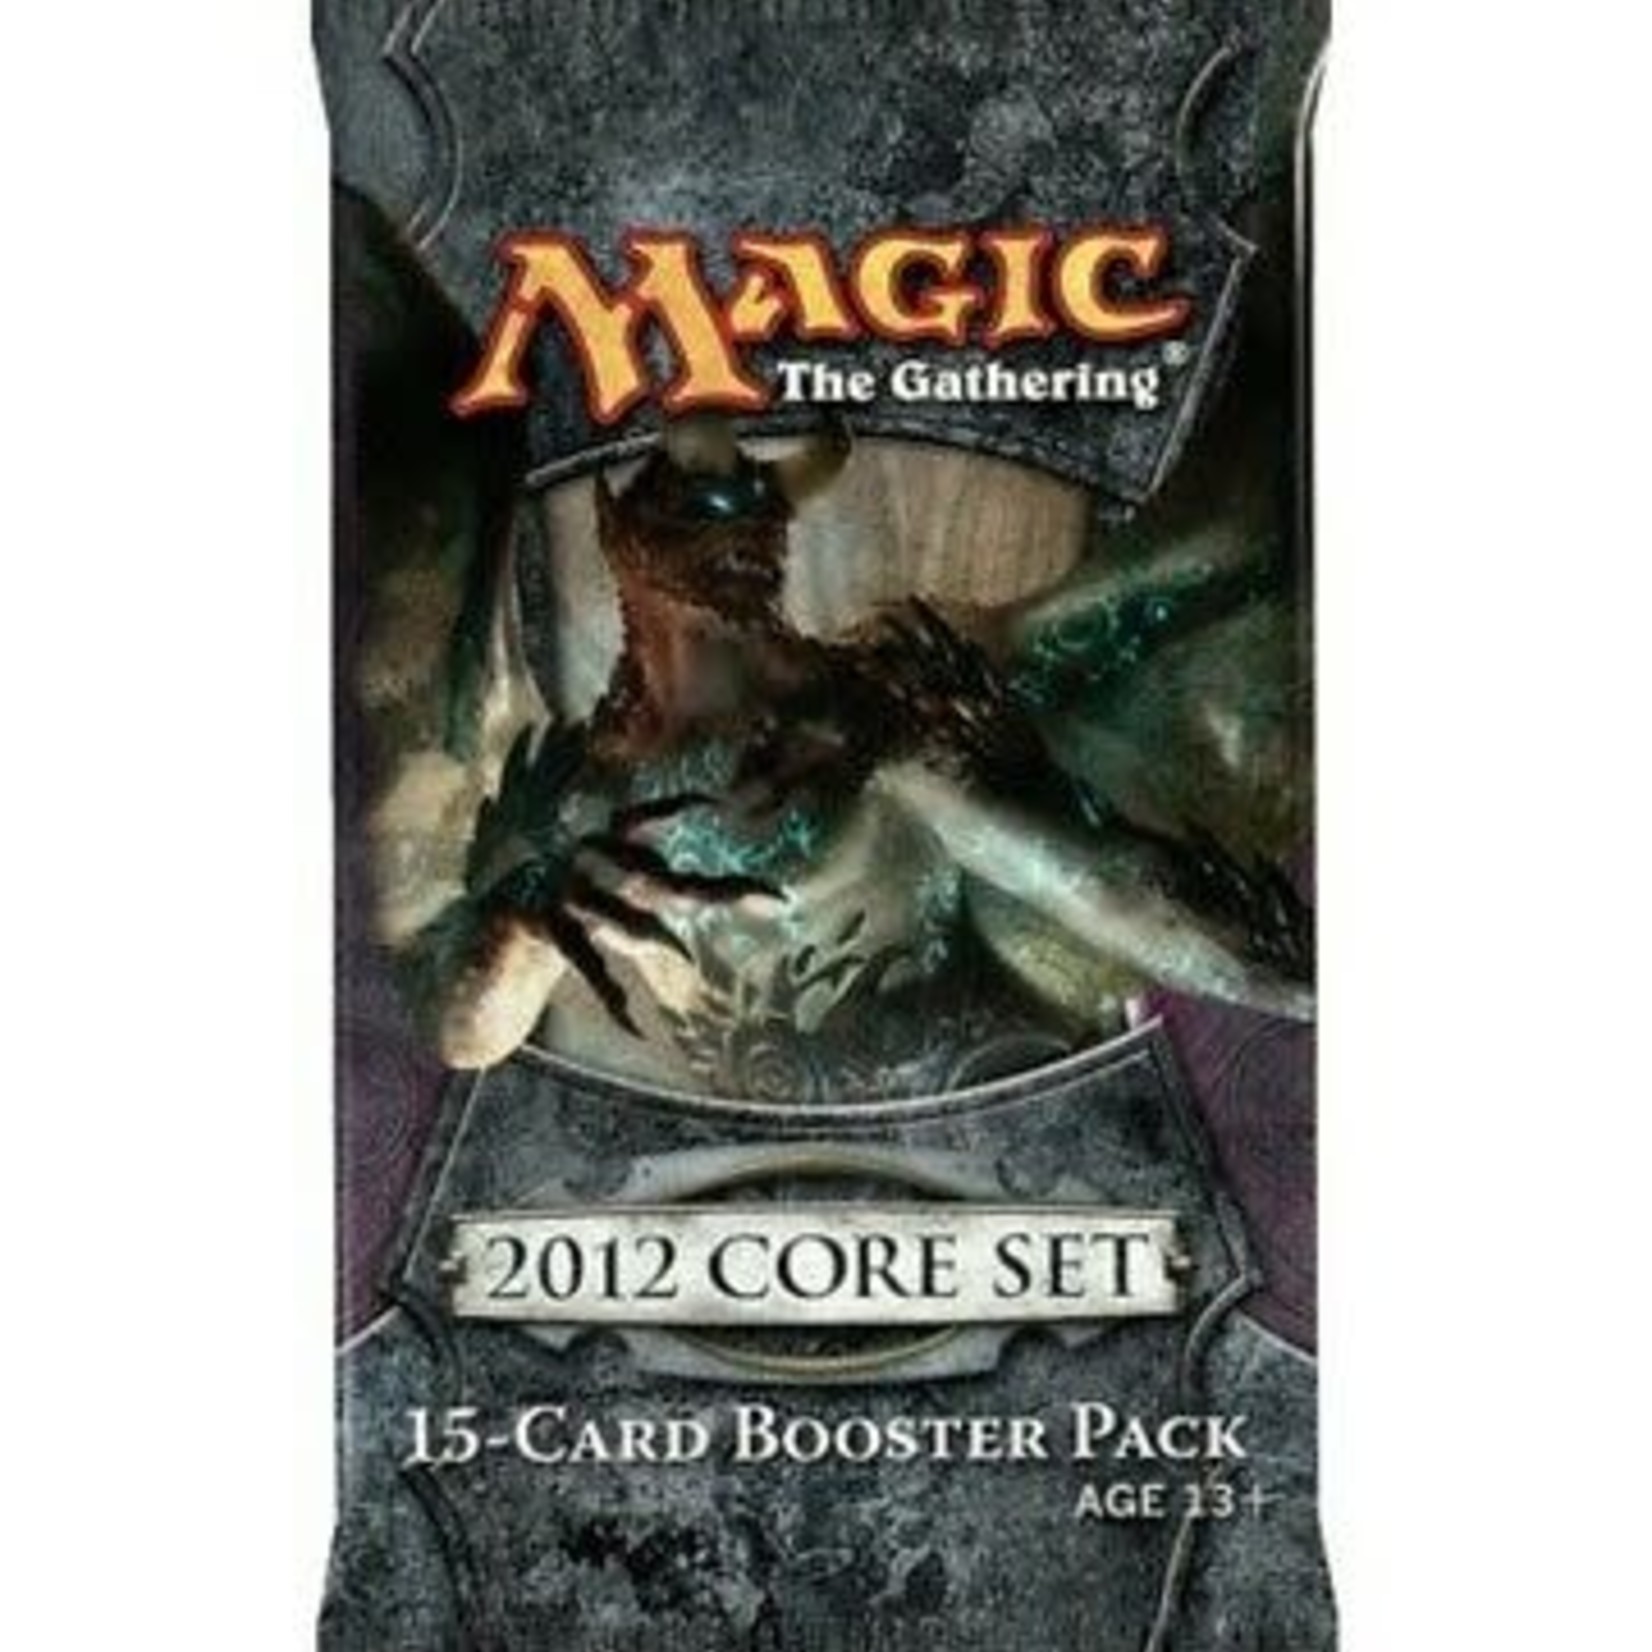 Wizards of the Coast Magic the Gathering 2012 Core Set M12 Booster Pack